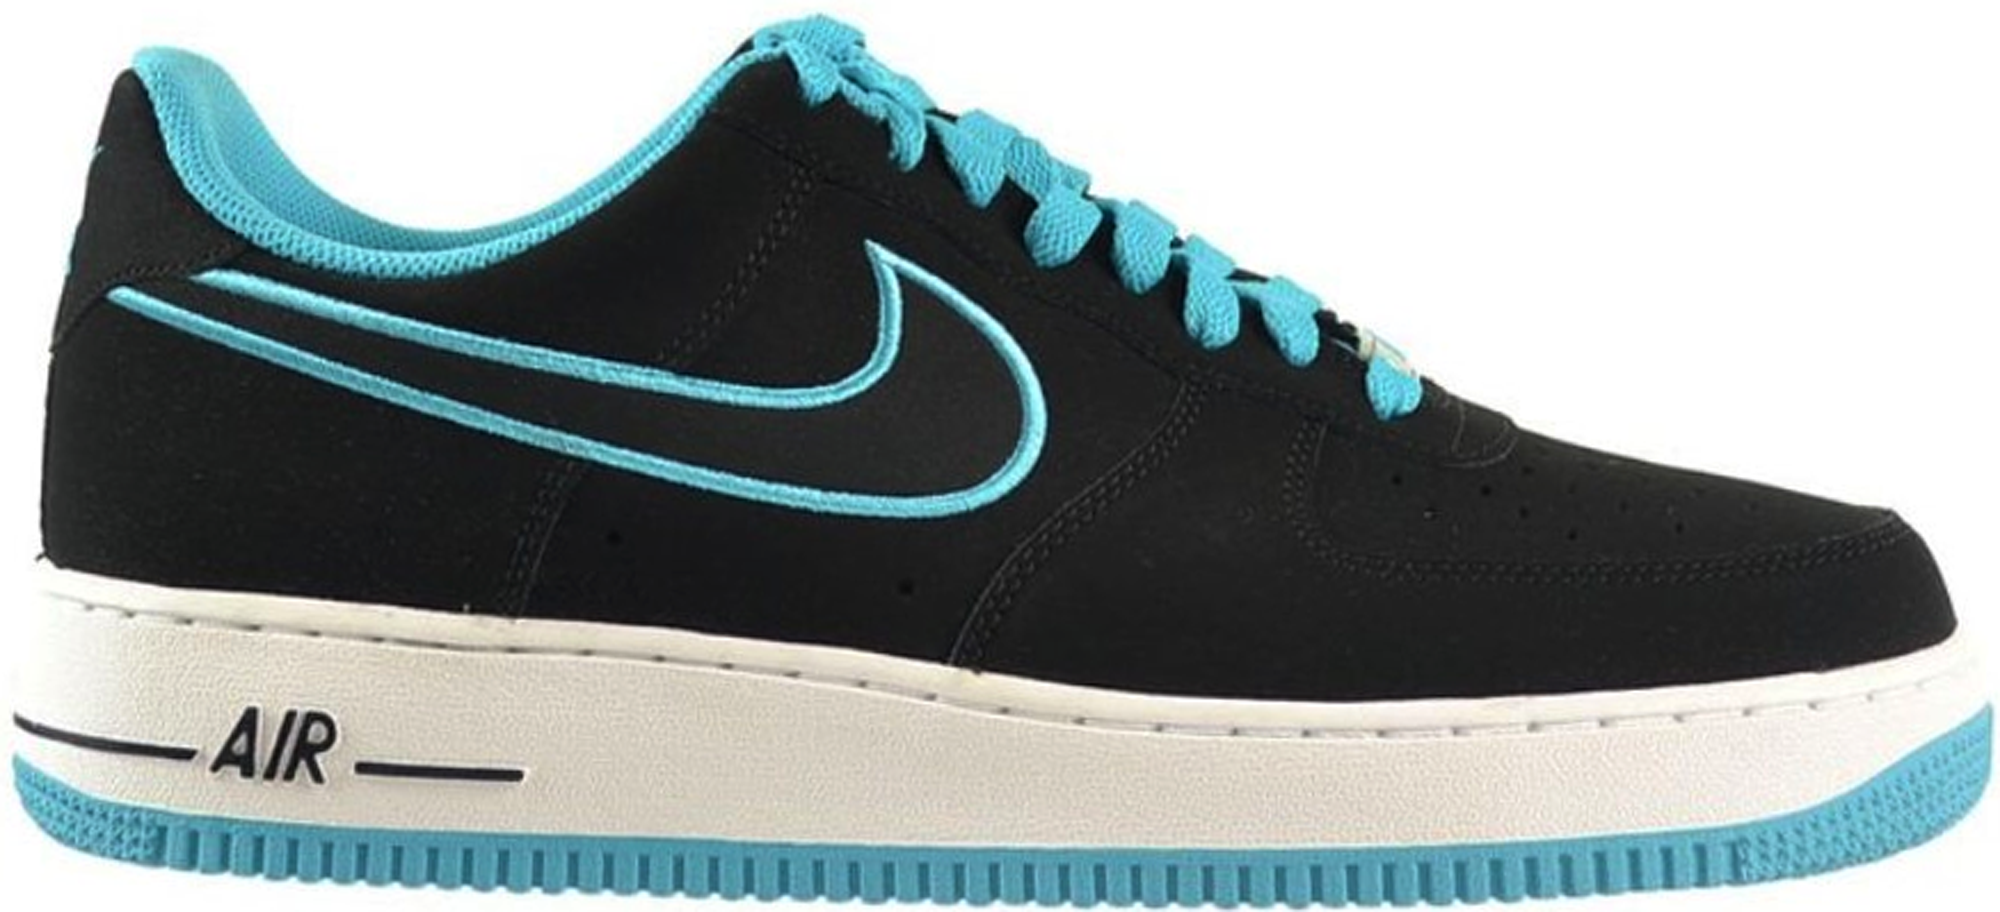 Nike Air Force 1 Low Black Turquoise 